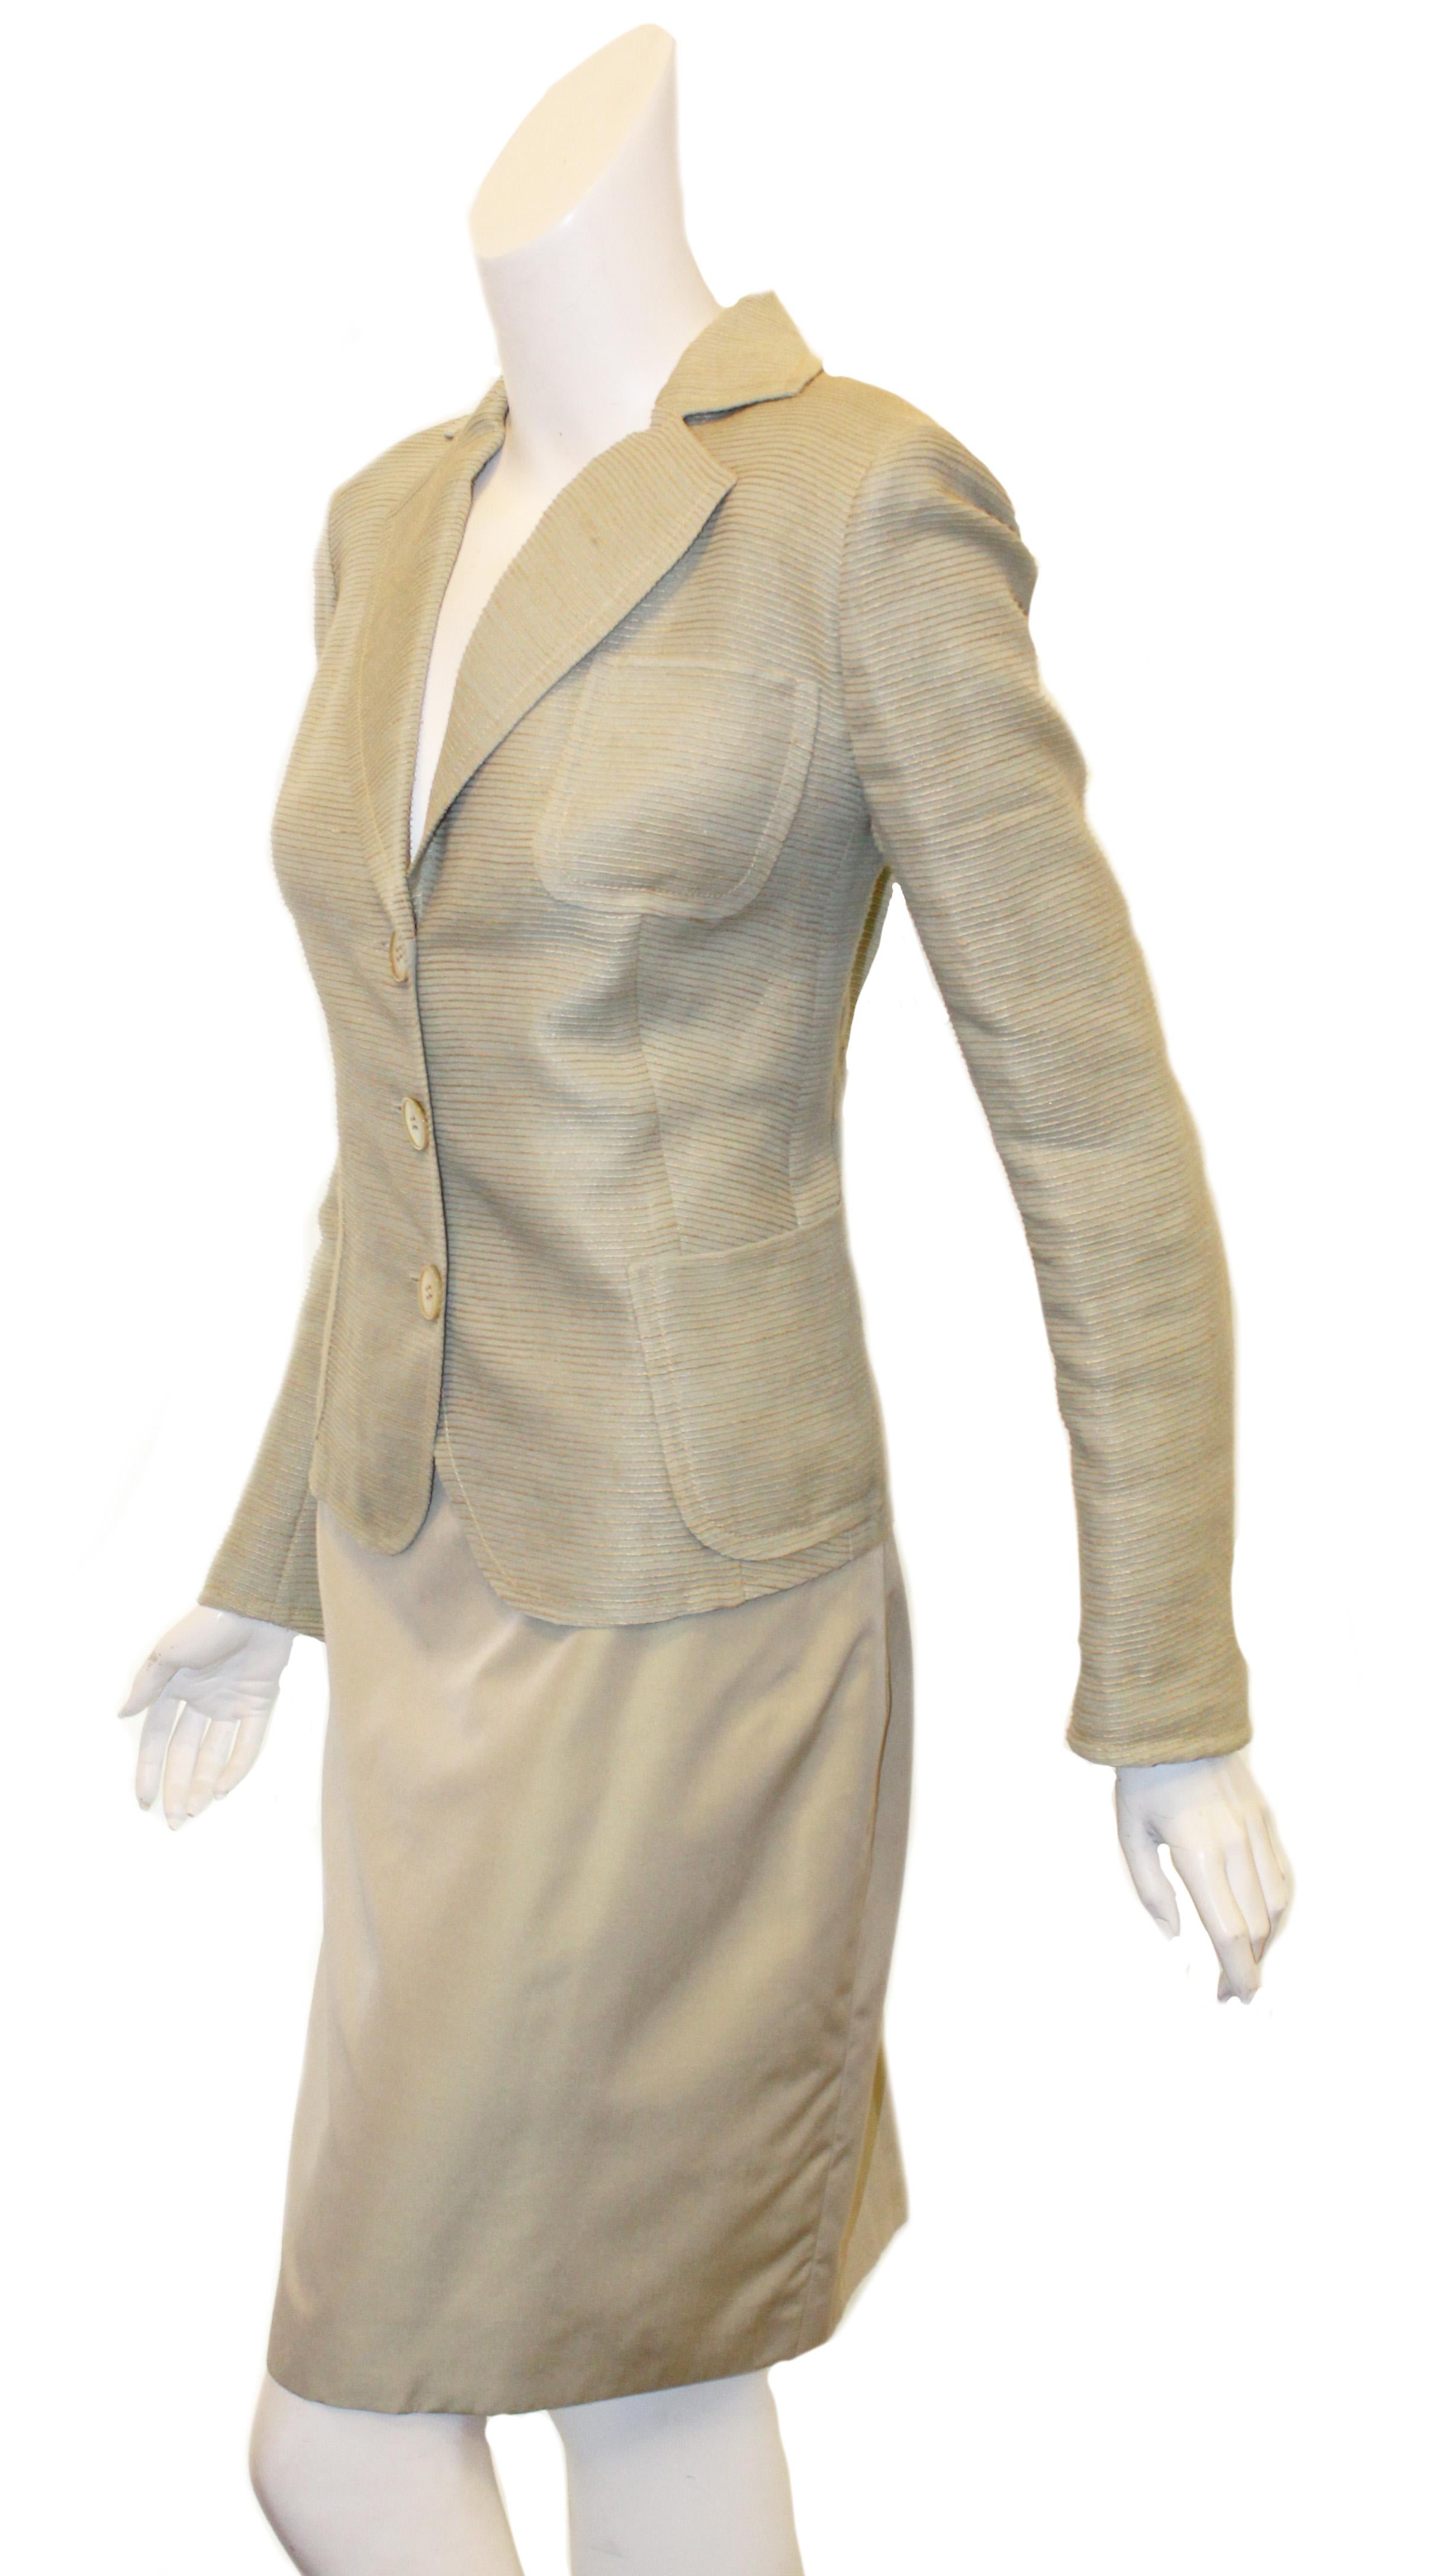 Akris green linen and silk suit features horizontal top stitched design allover jacket. 
3-button, ventless jacket has 3 patch pockets - one at breast and two at hem - and is lined in green silk.  Beige straight skirt finishes the look.  Excellent